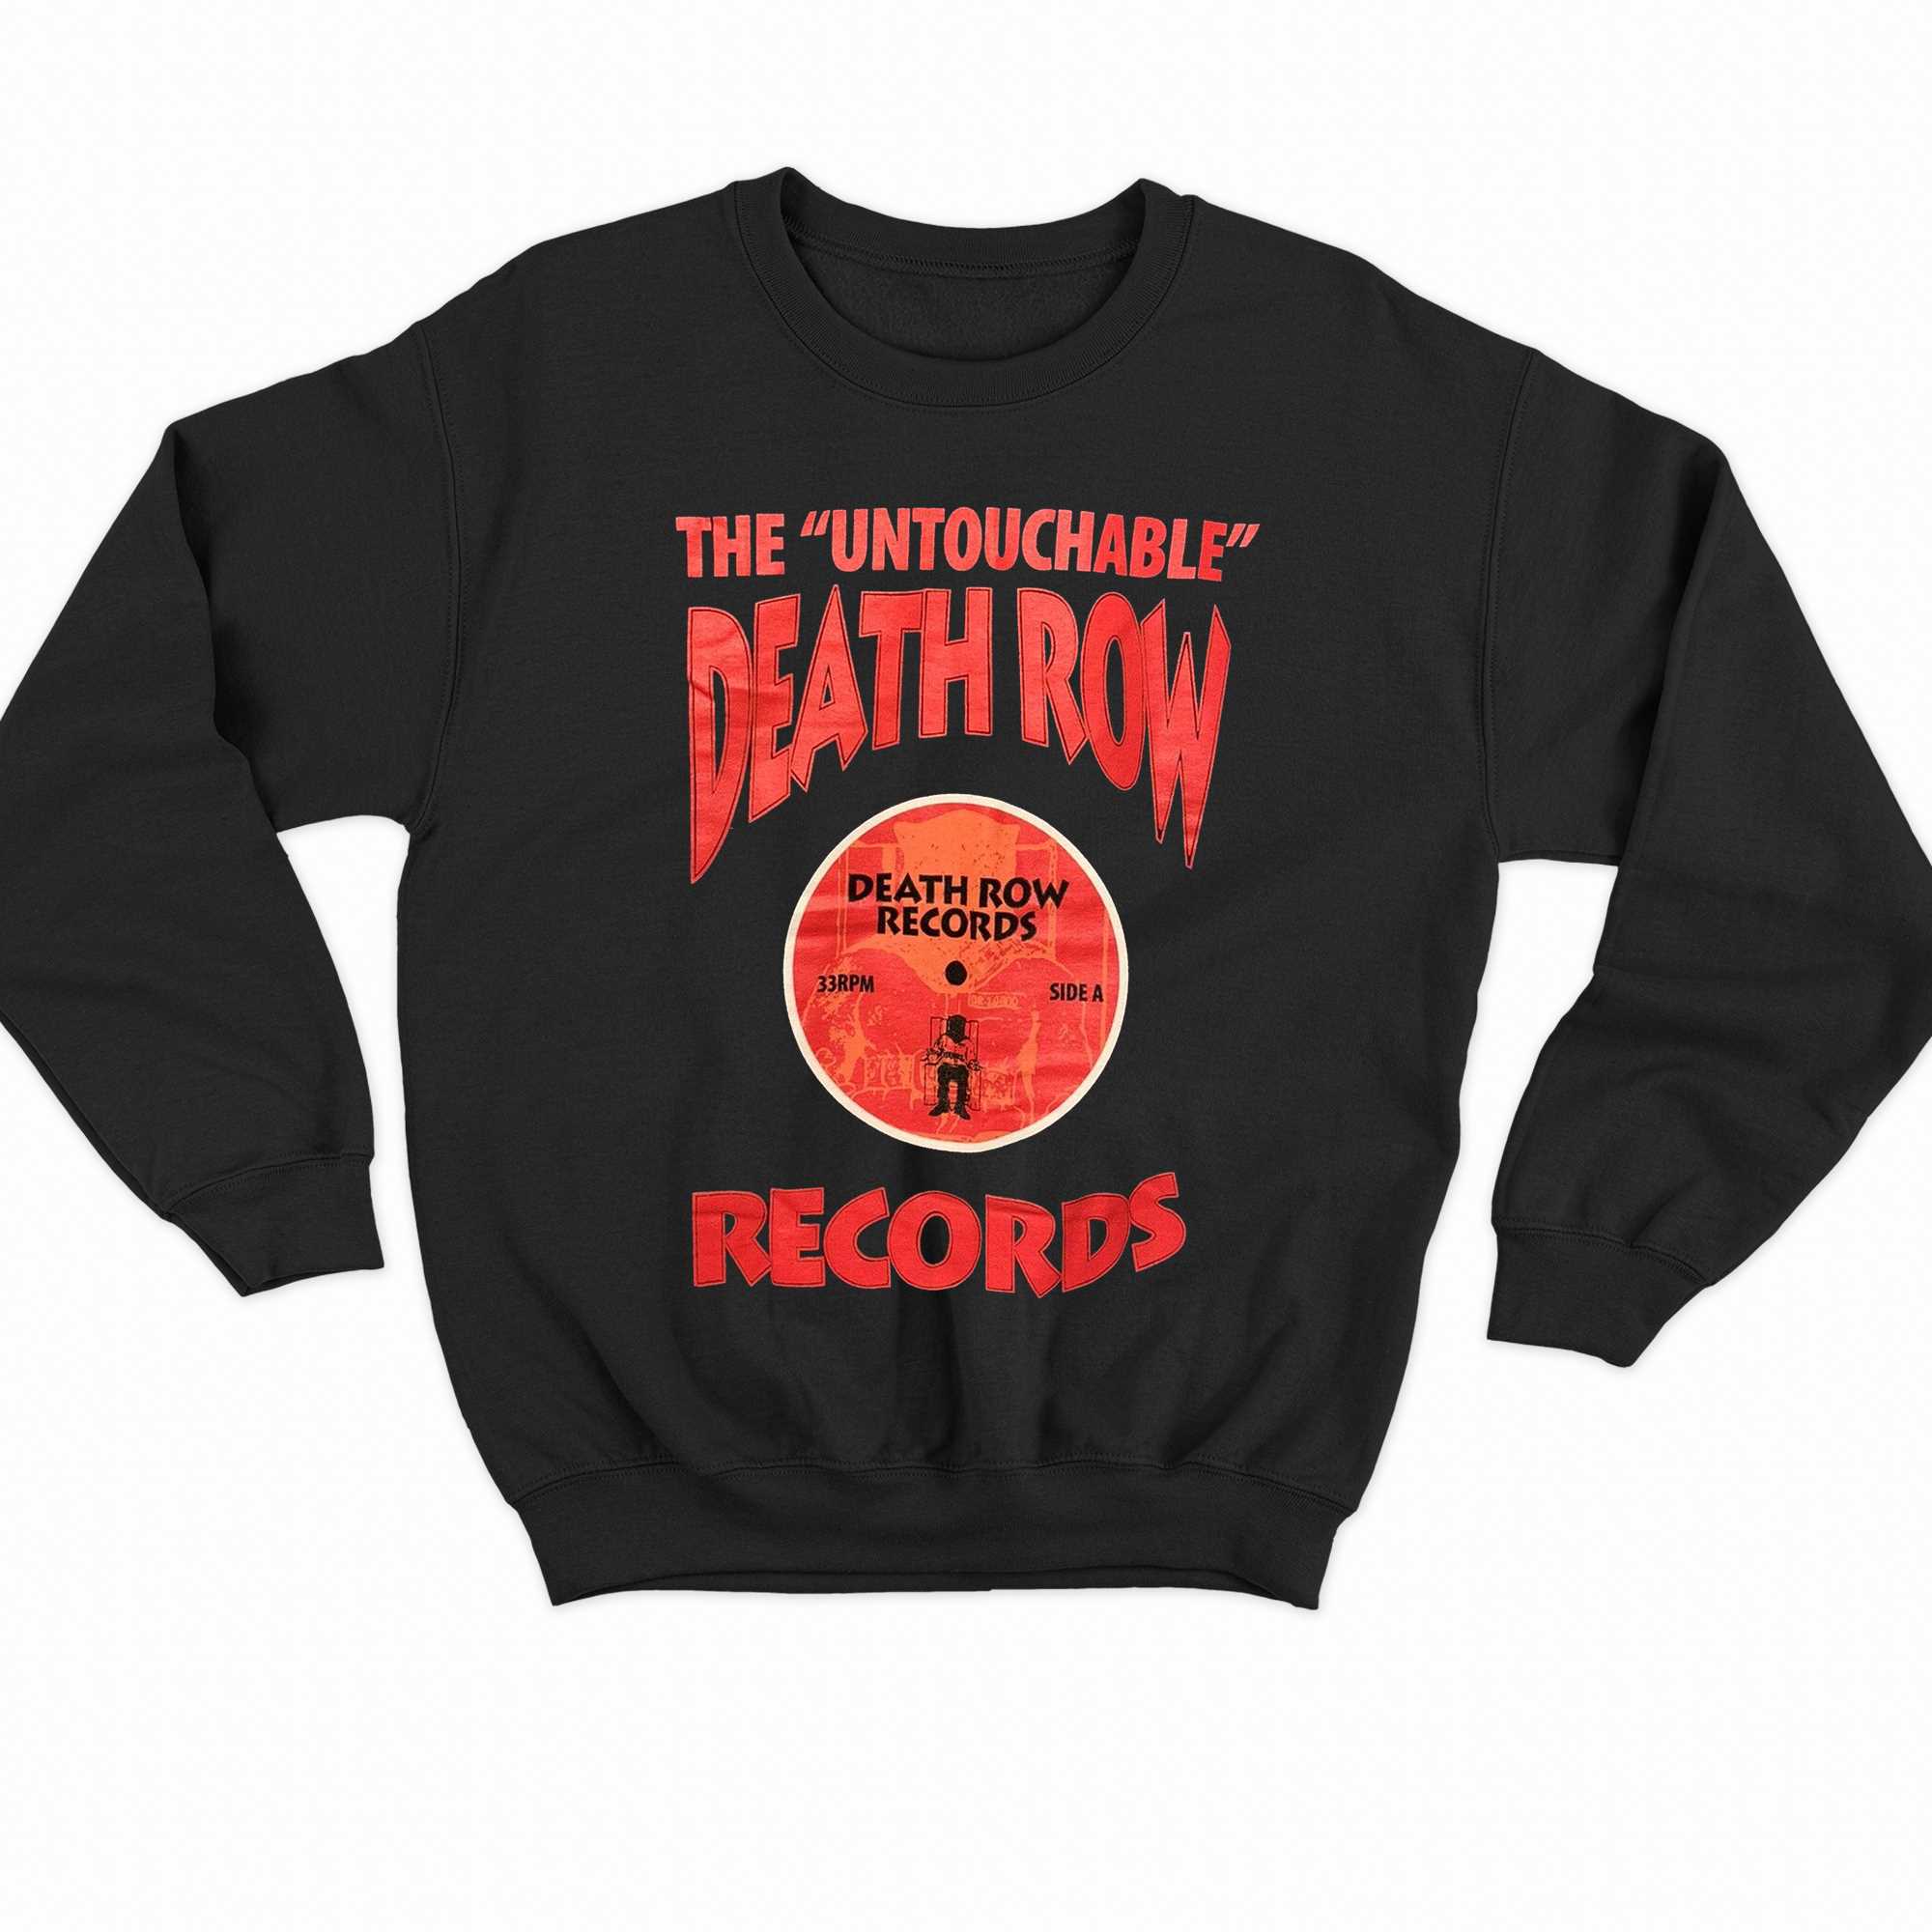 The Untouchable Death Row Records T Shirt Small Black Dr Dre Snoop Dogg 